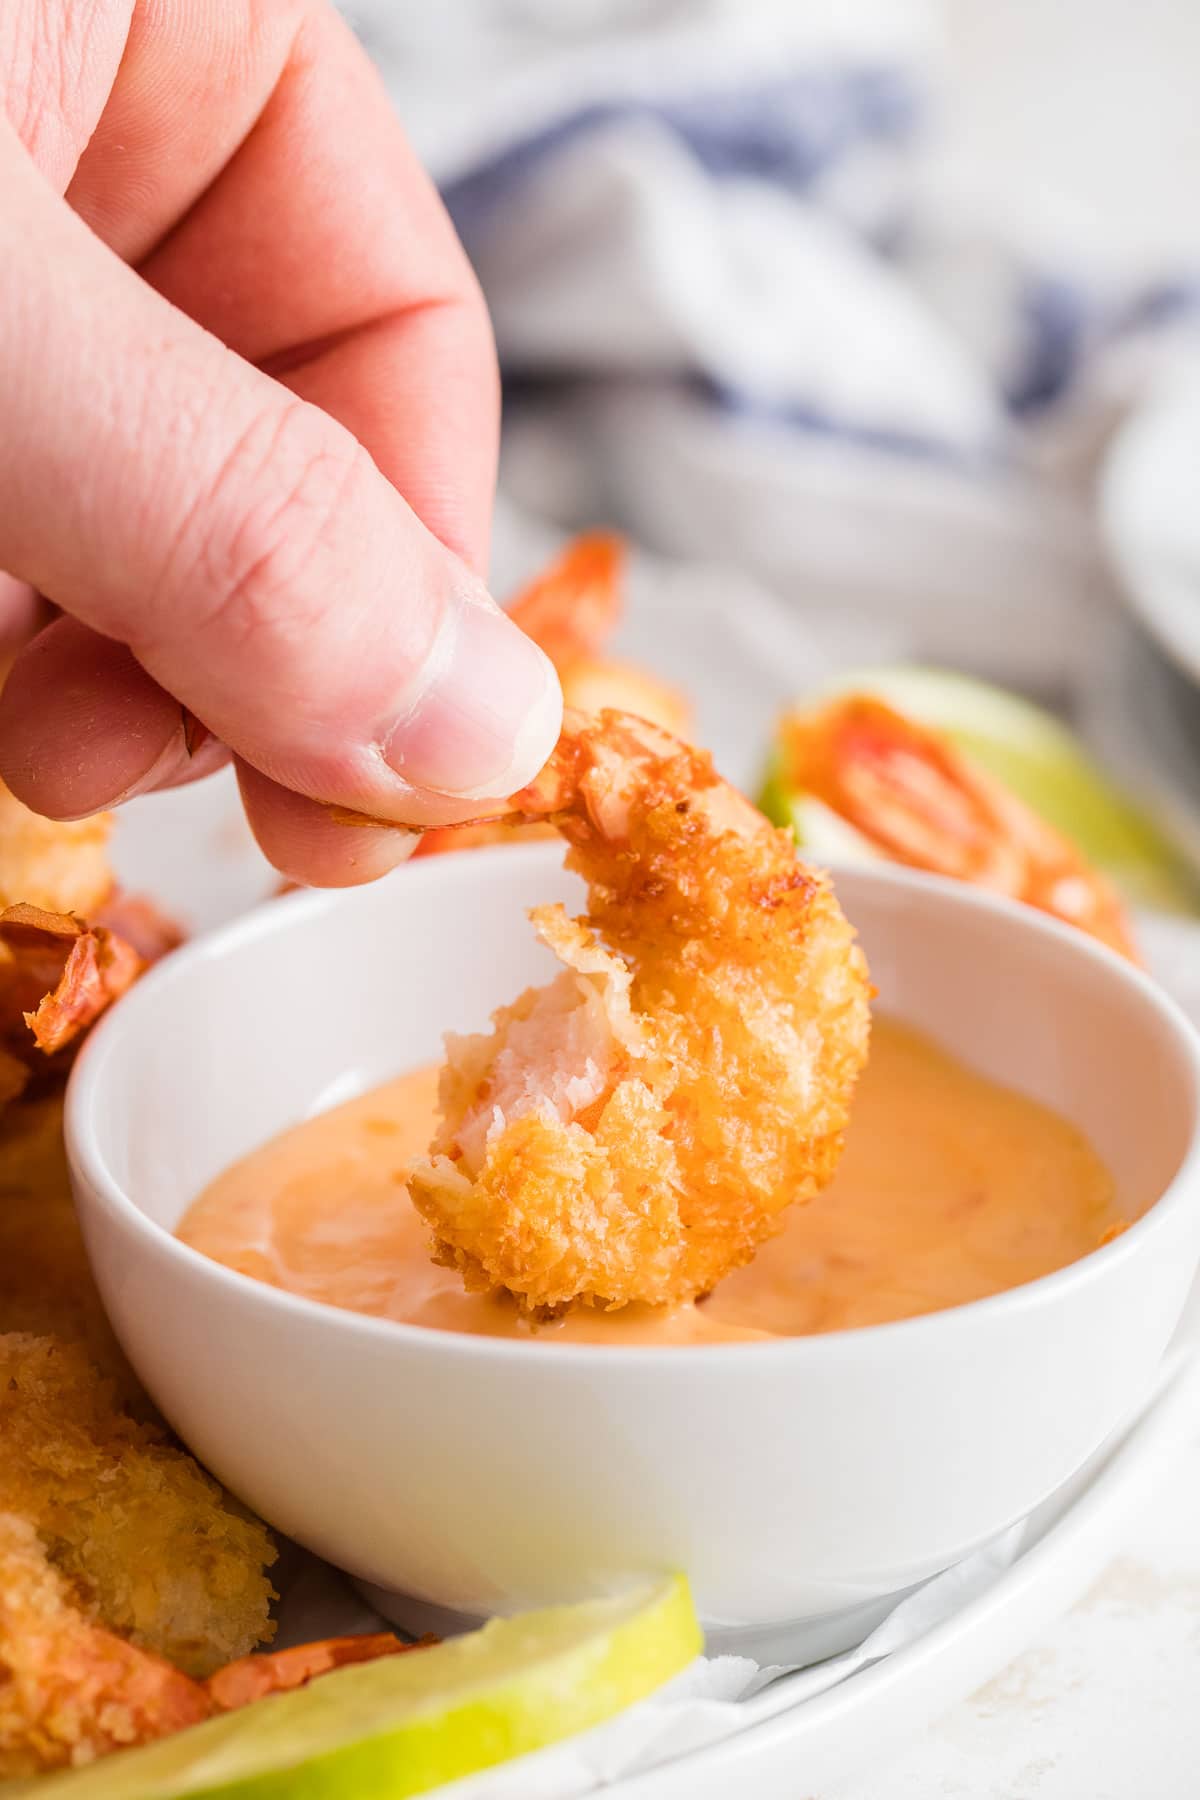 A single breaded shrimp dipped into an orange sauce in a small white bowl.